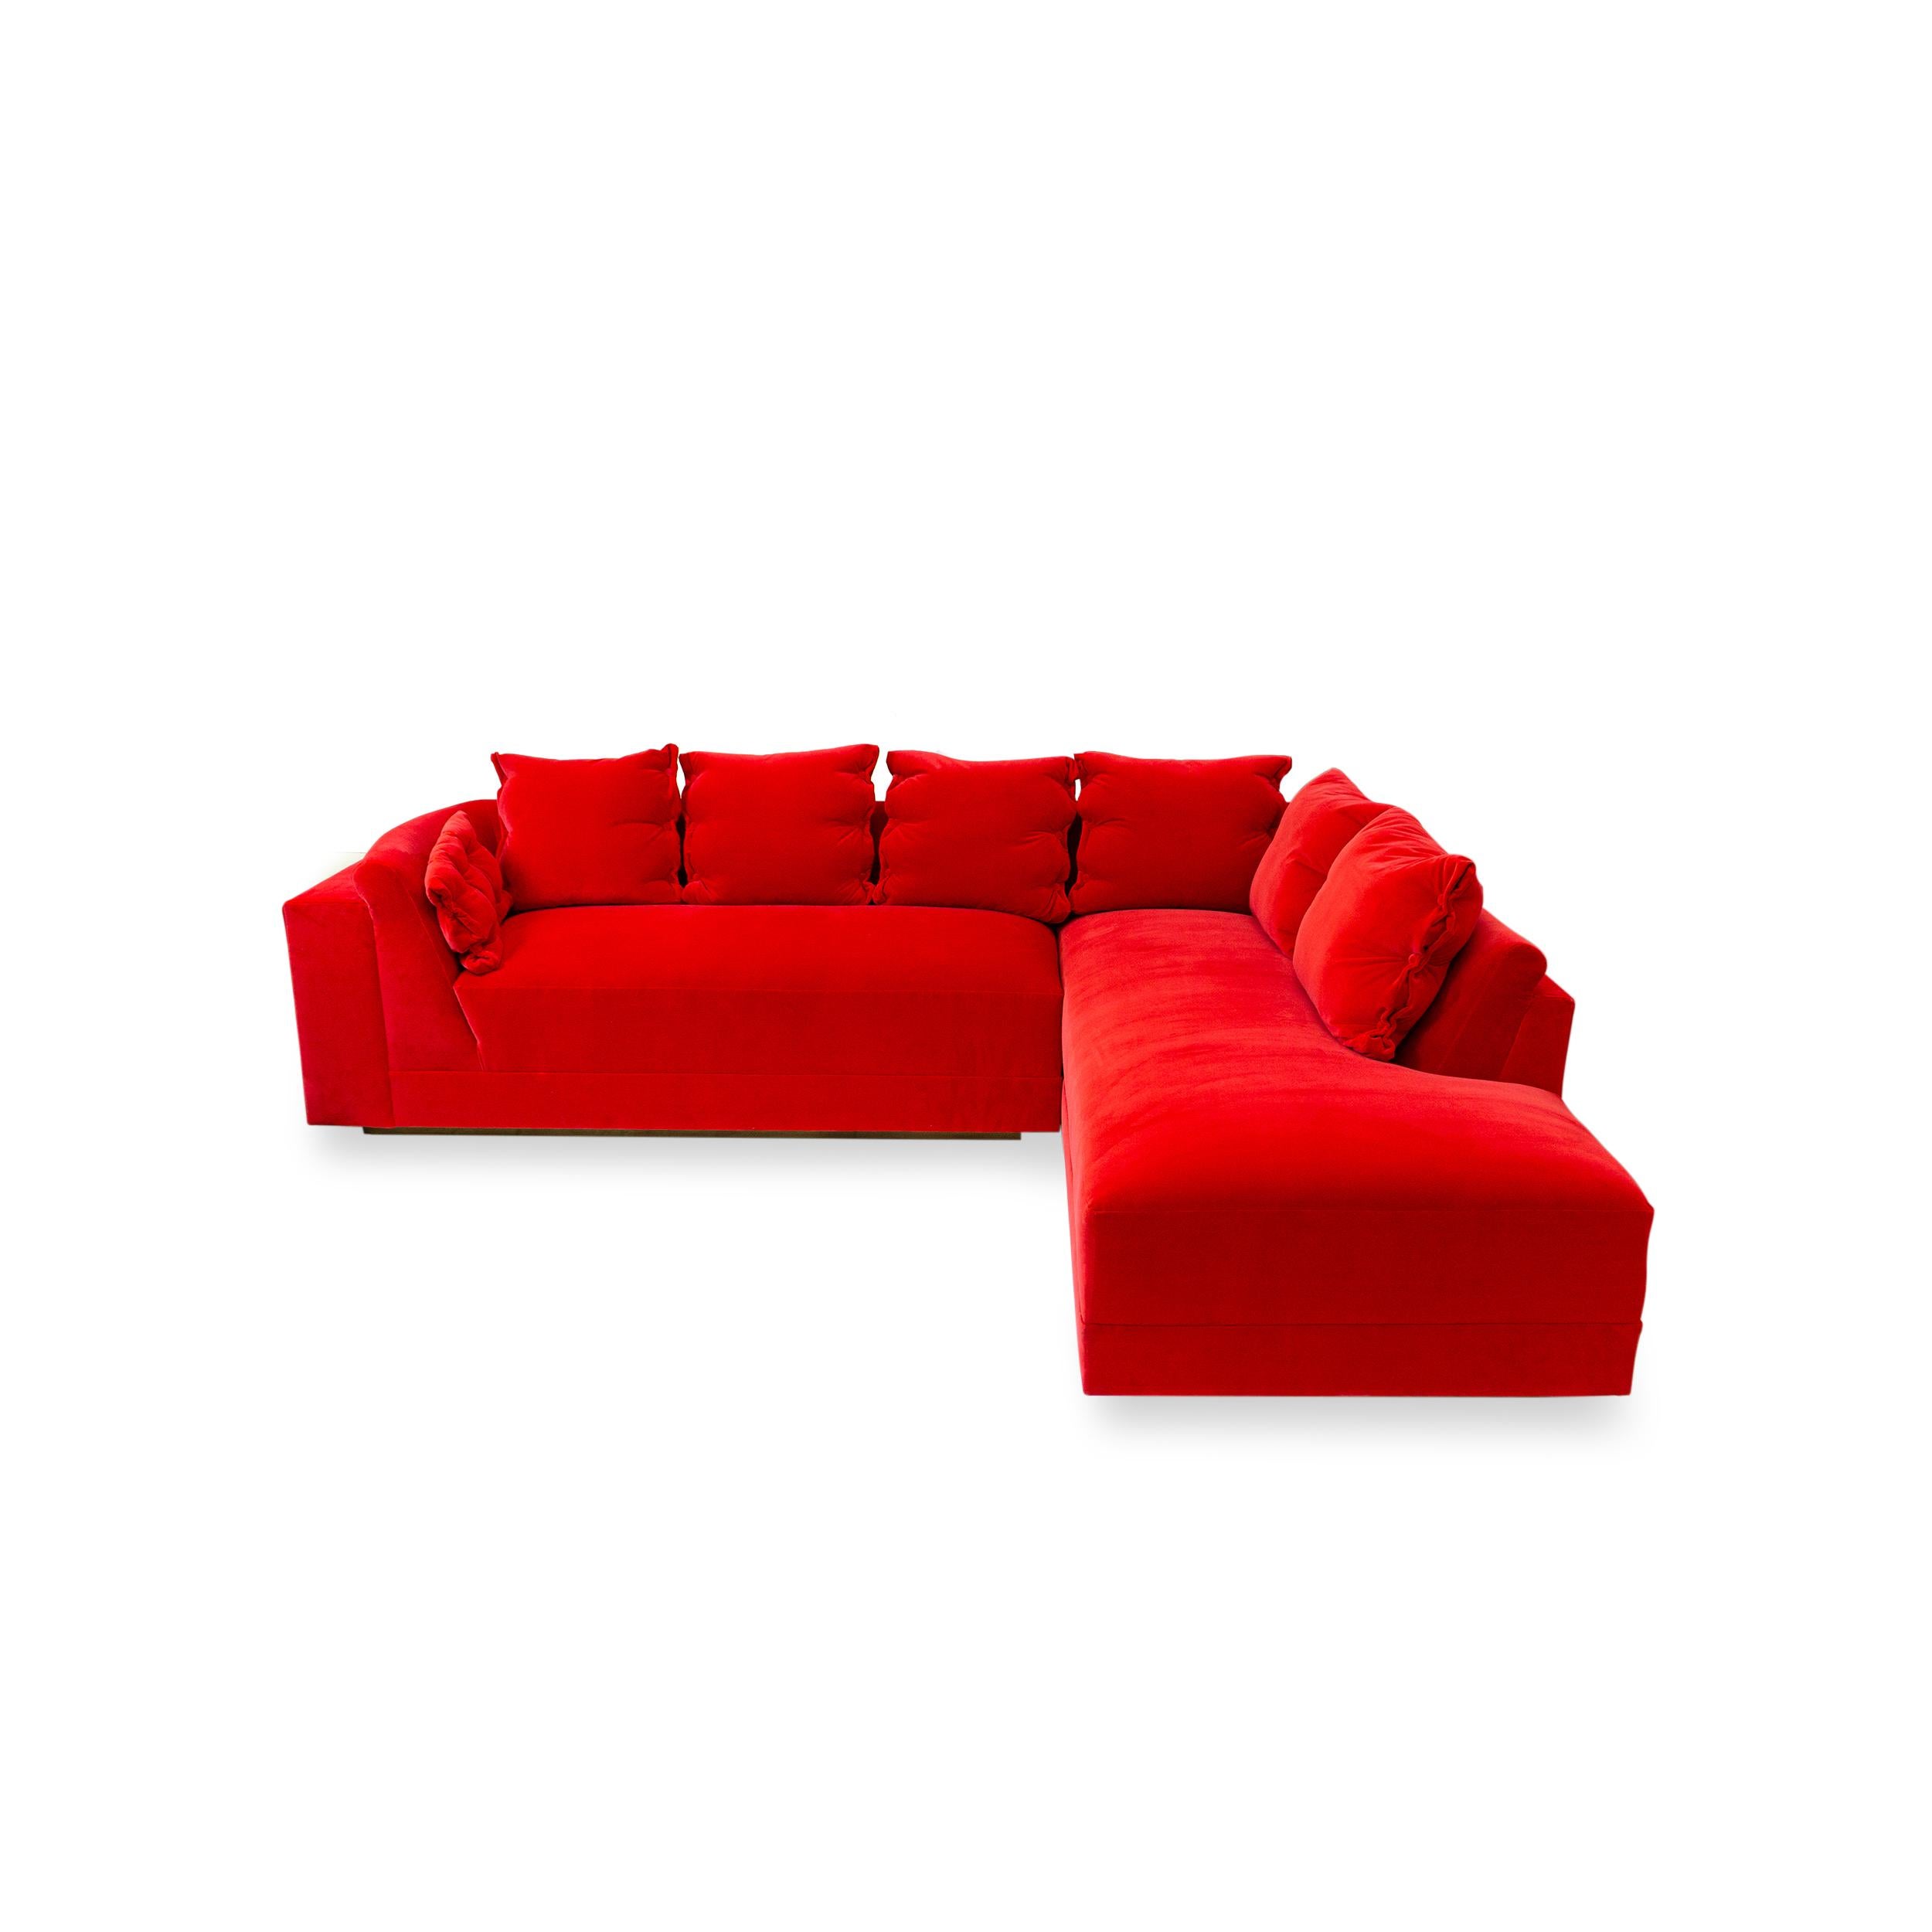 Contemporary Modern L Sectional with Inside Curve, Button Pillows and Bright Red Velvet For Sale